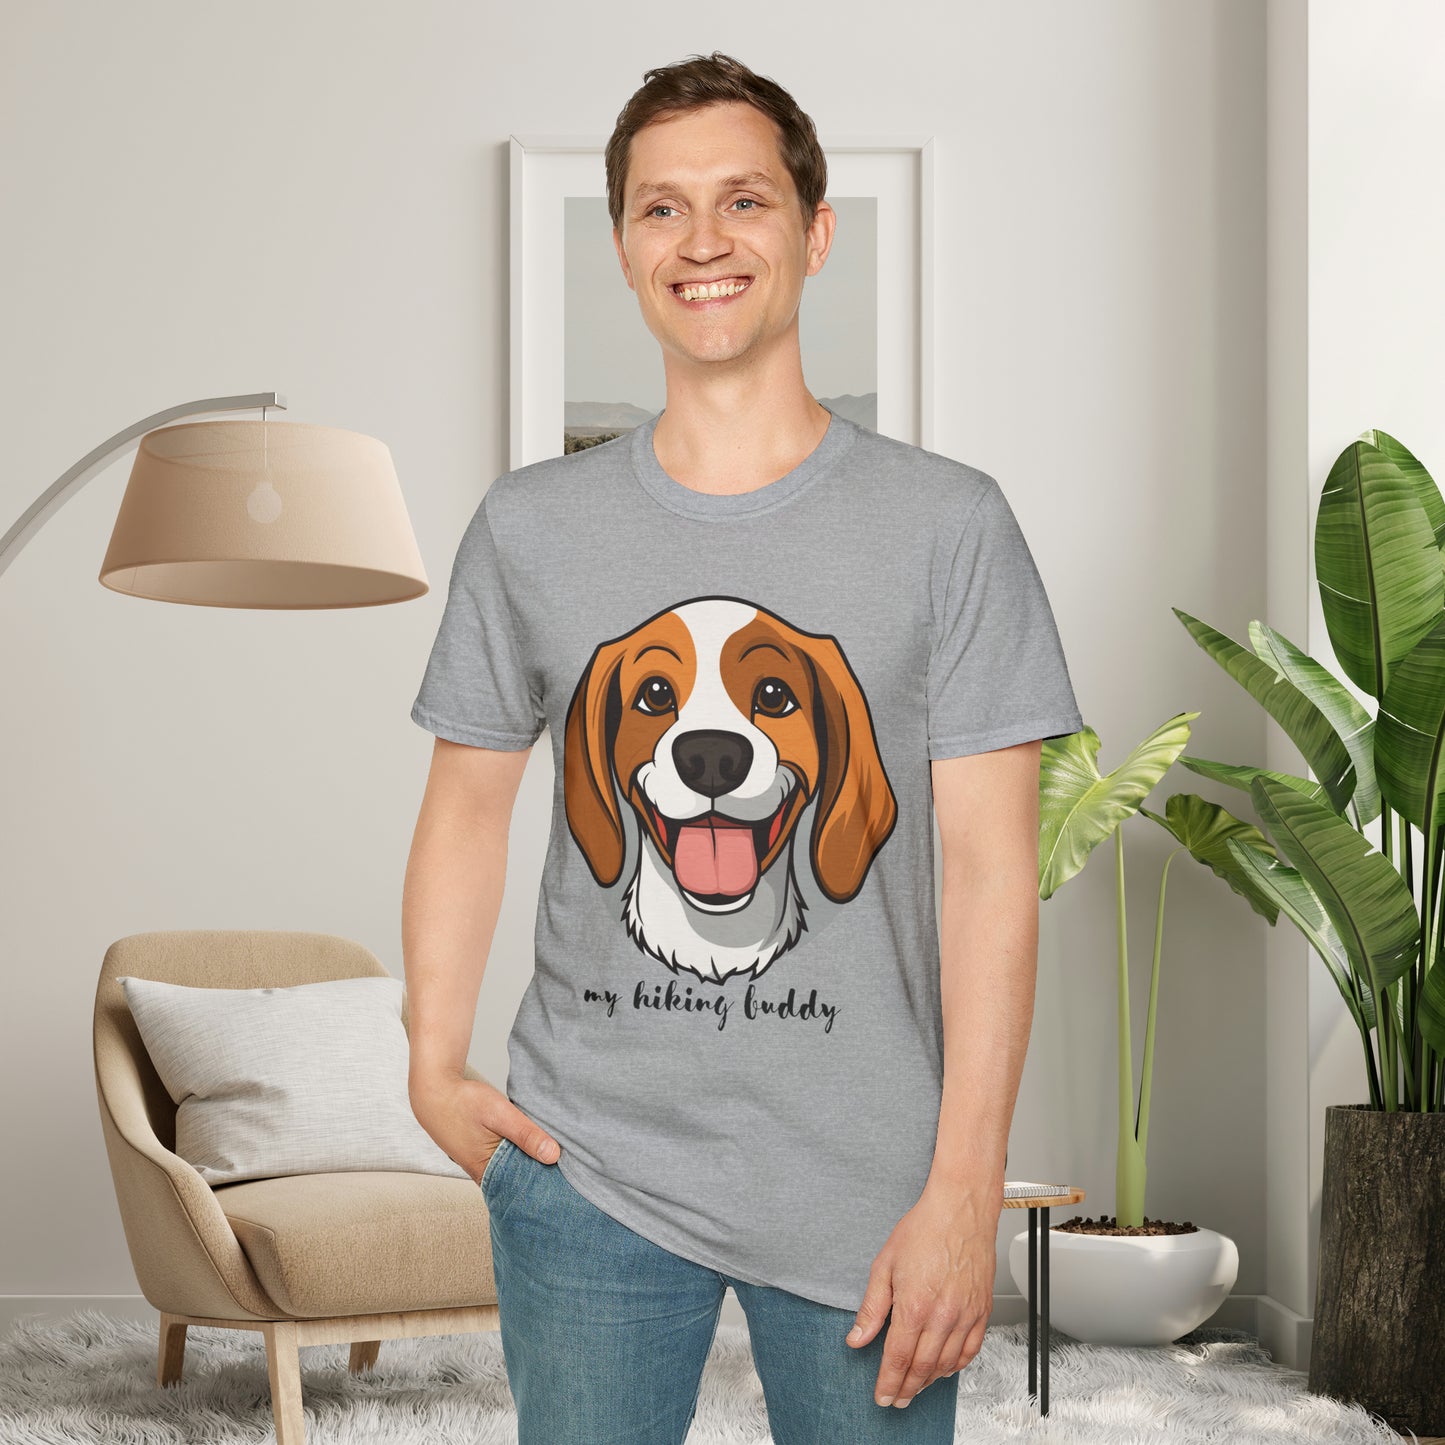 A great shirt for the dog lover who just can’t imagine a hike without their furry friend. This is a Unisex Softstyle T-Shirt.